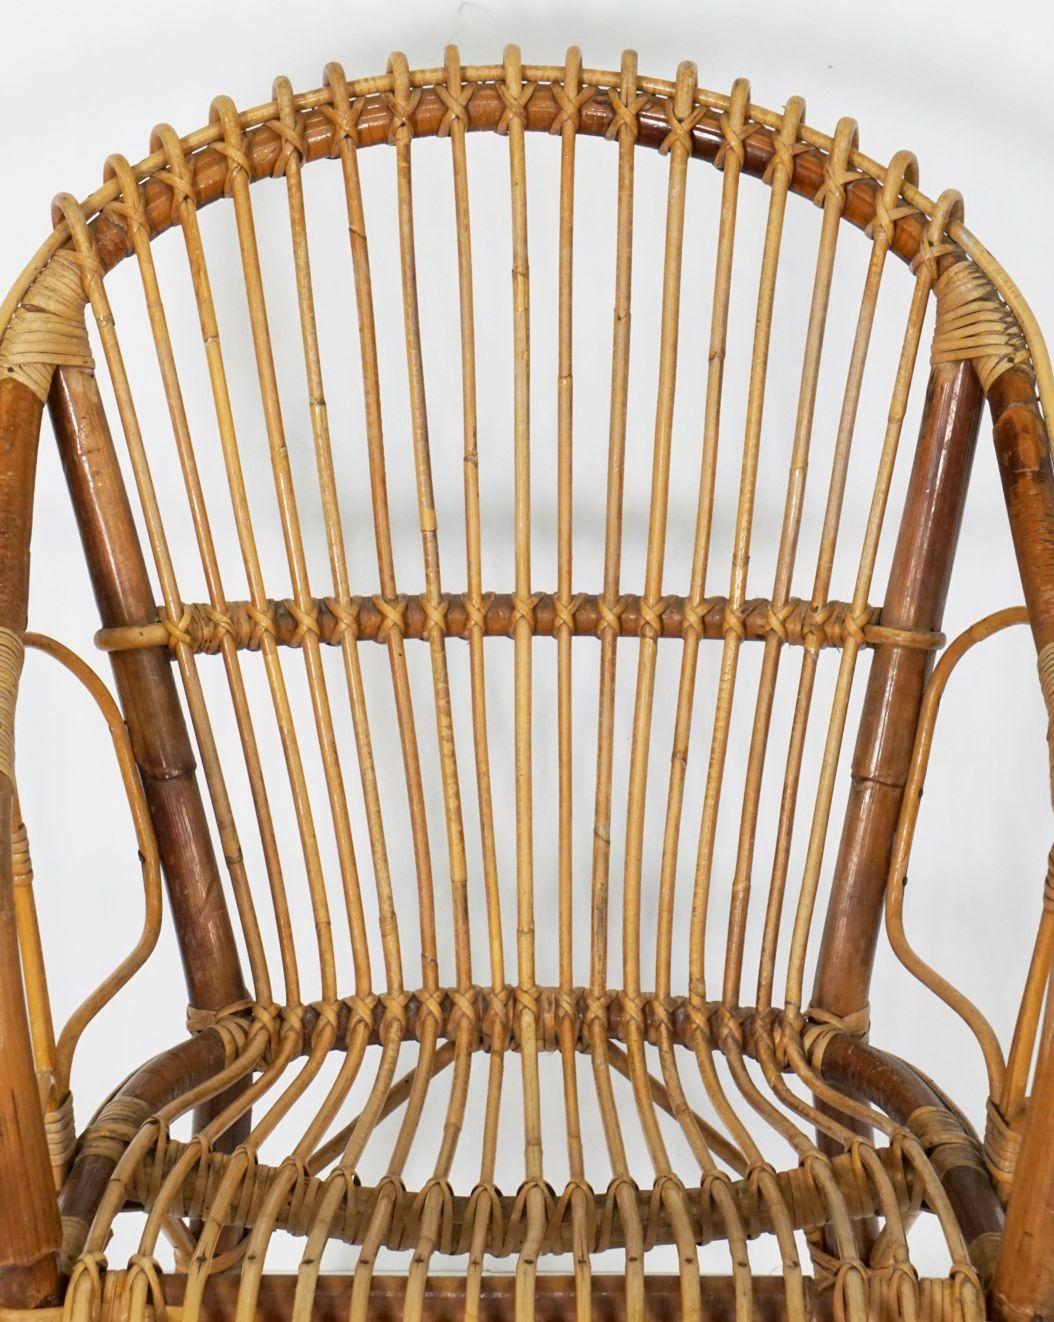 Wicker Italian Fan-Backed Arm Chairs of Rattan and Bamboo from the Mid-20th Century For Sale